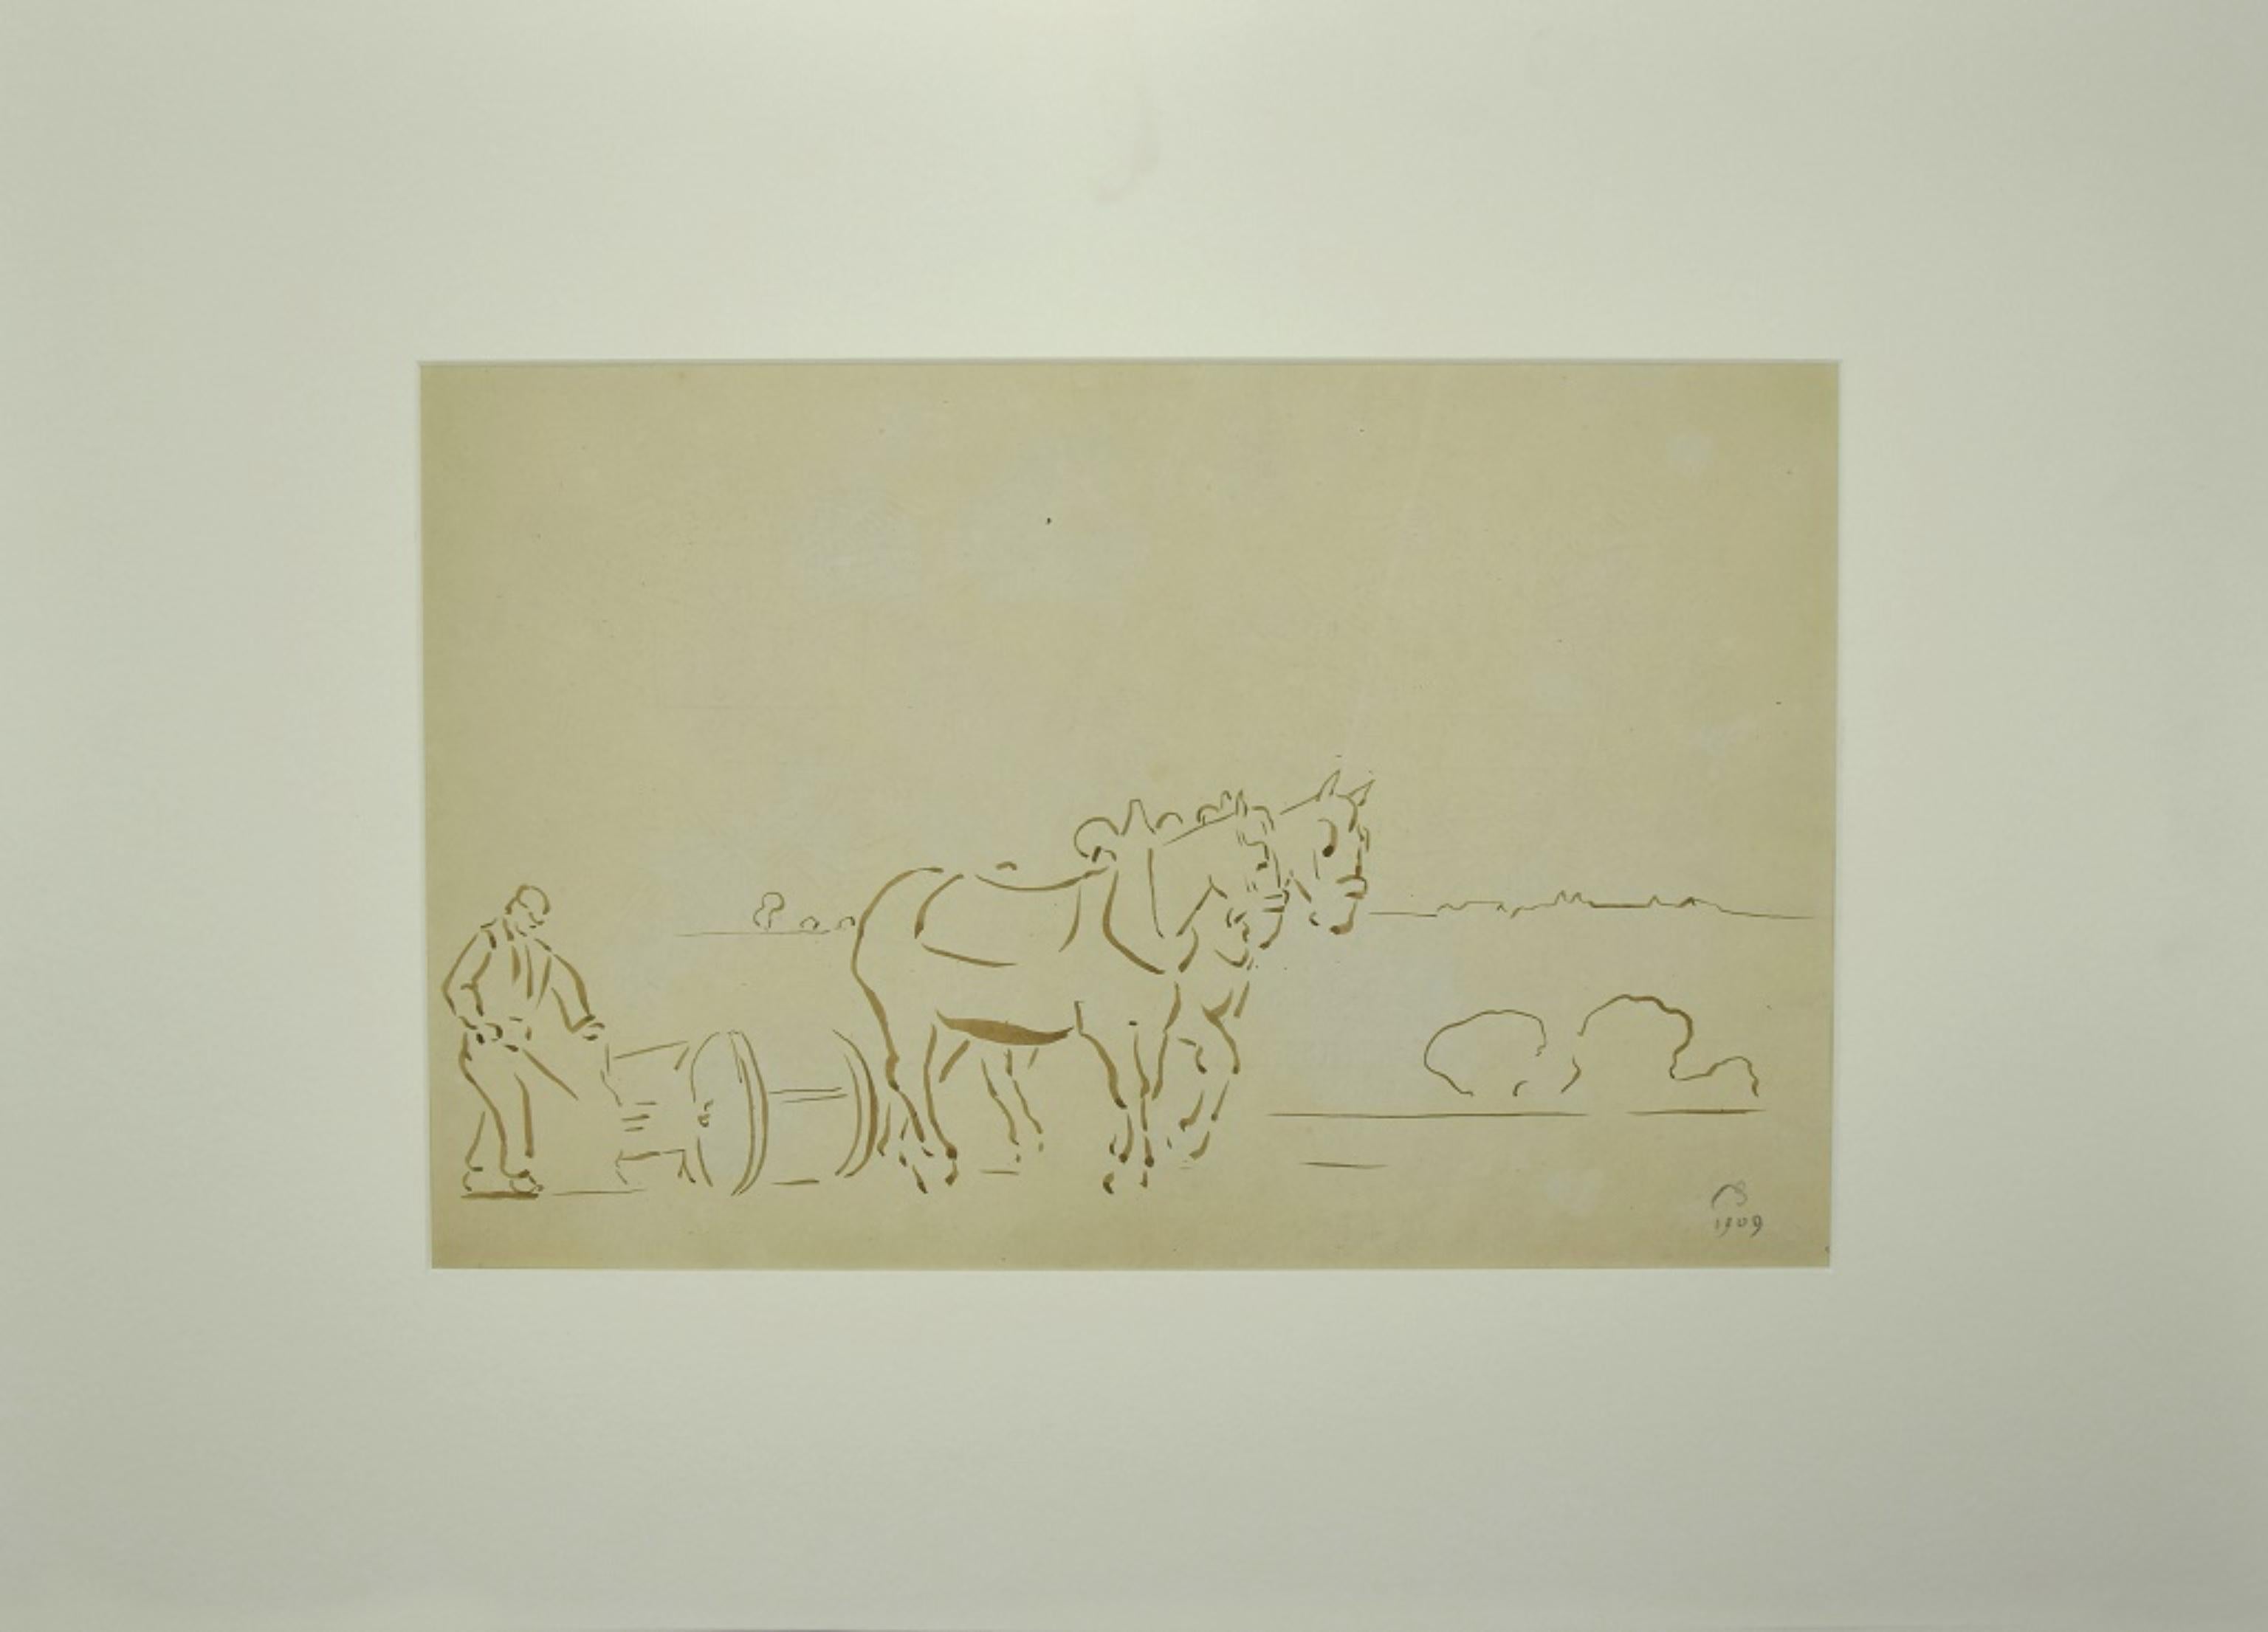 Unknown Figurative Art - Horses with Plough - Watercolor - Late 19th Century